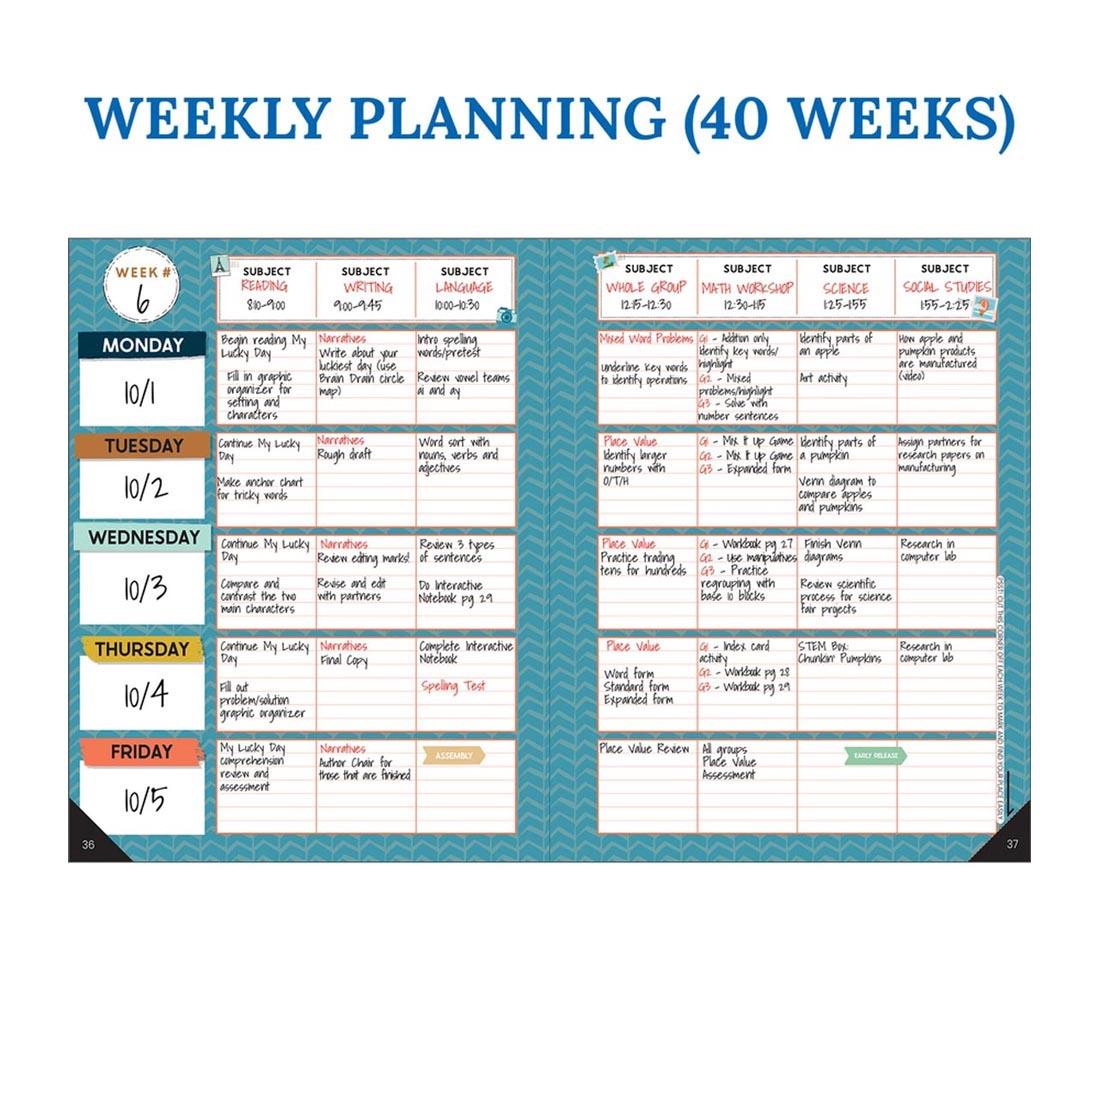 Sample of weekly planning pages from the Let's Explore Teacher Planner By Carson Dellosa